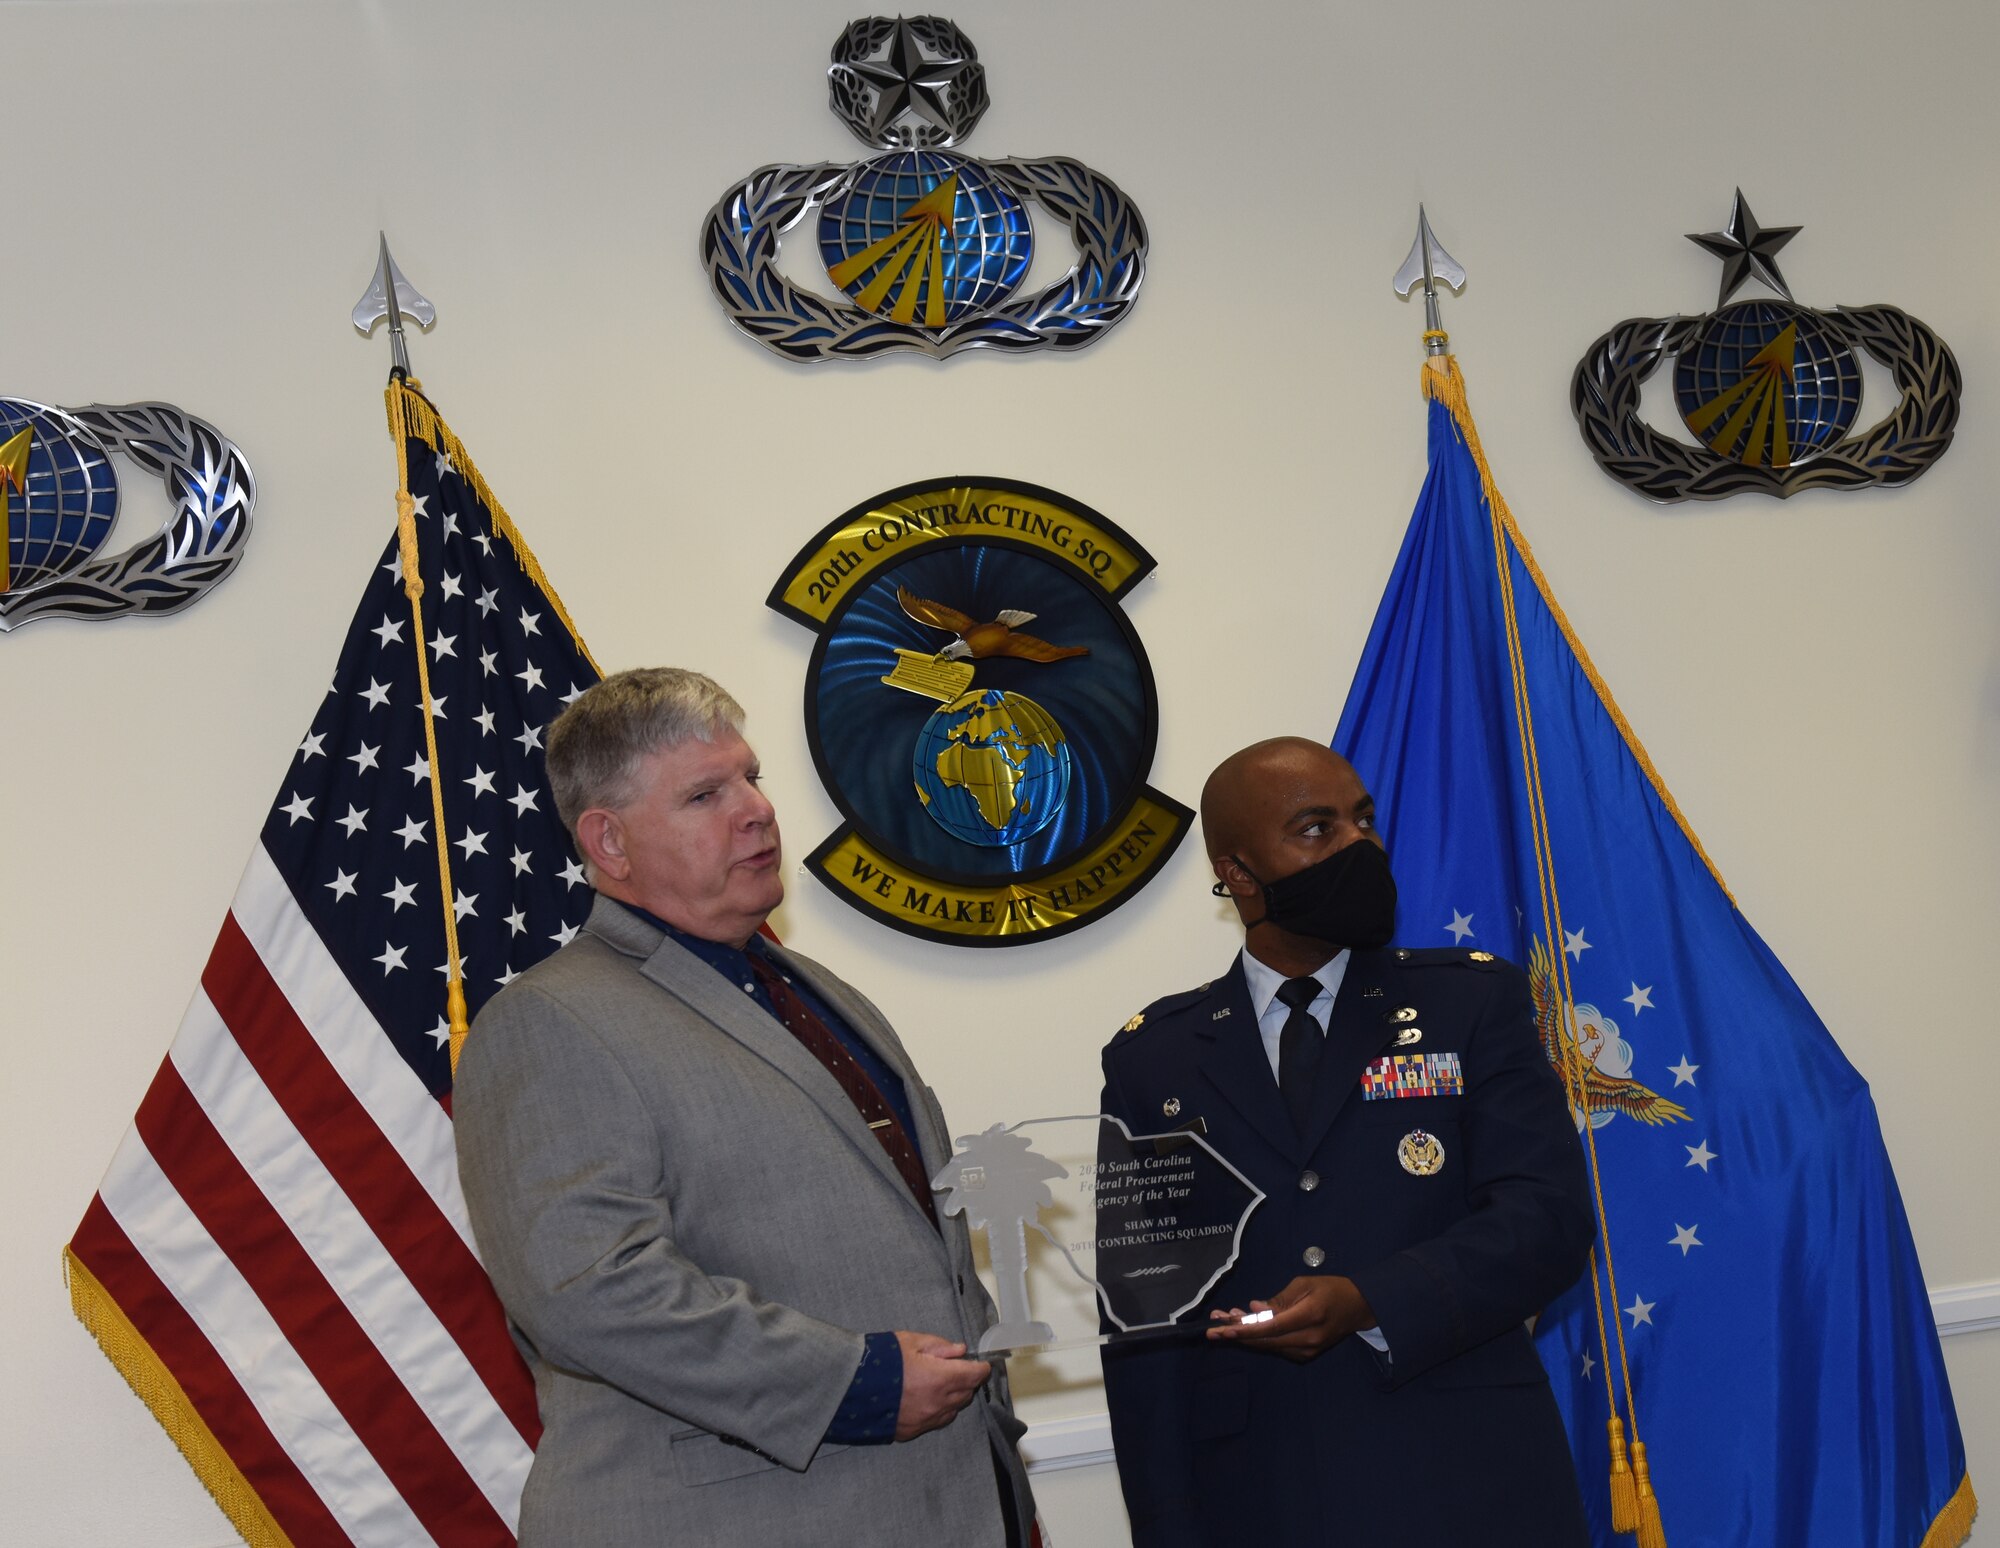 Image of the 20th Contracting Squadron commander accepting an award.